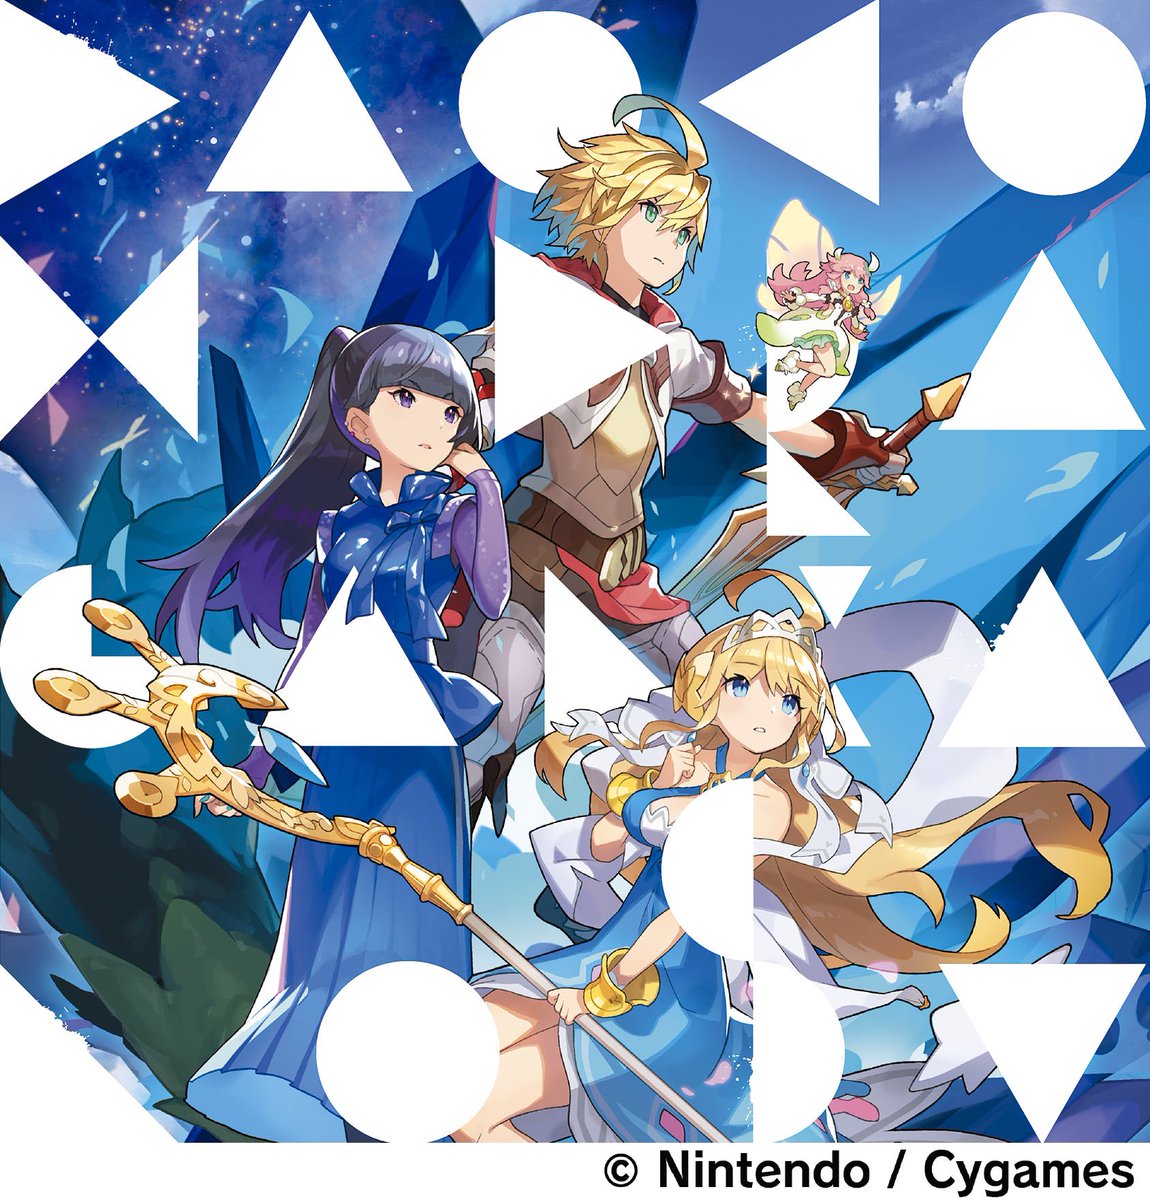 Cover art for『DAOKO × Scha Dara Parr - Fire Emblem Main Theme (Ver. Heroes)』from the release『DAOKO x Dragalia Lost』